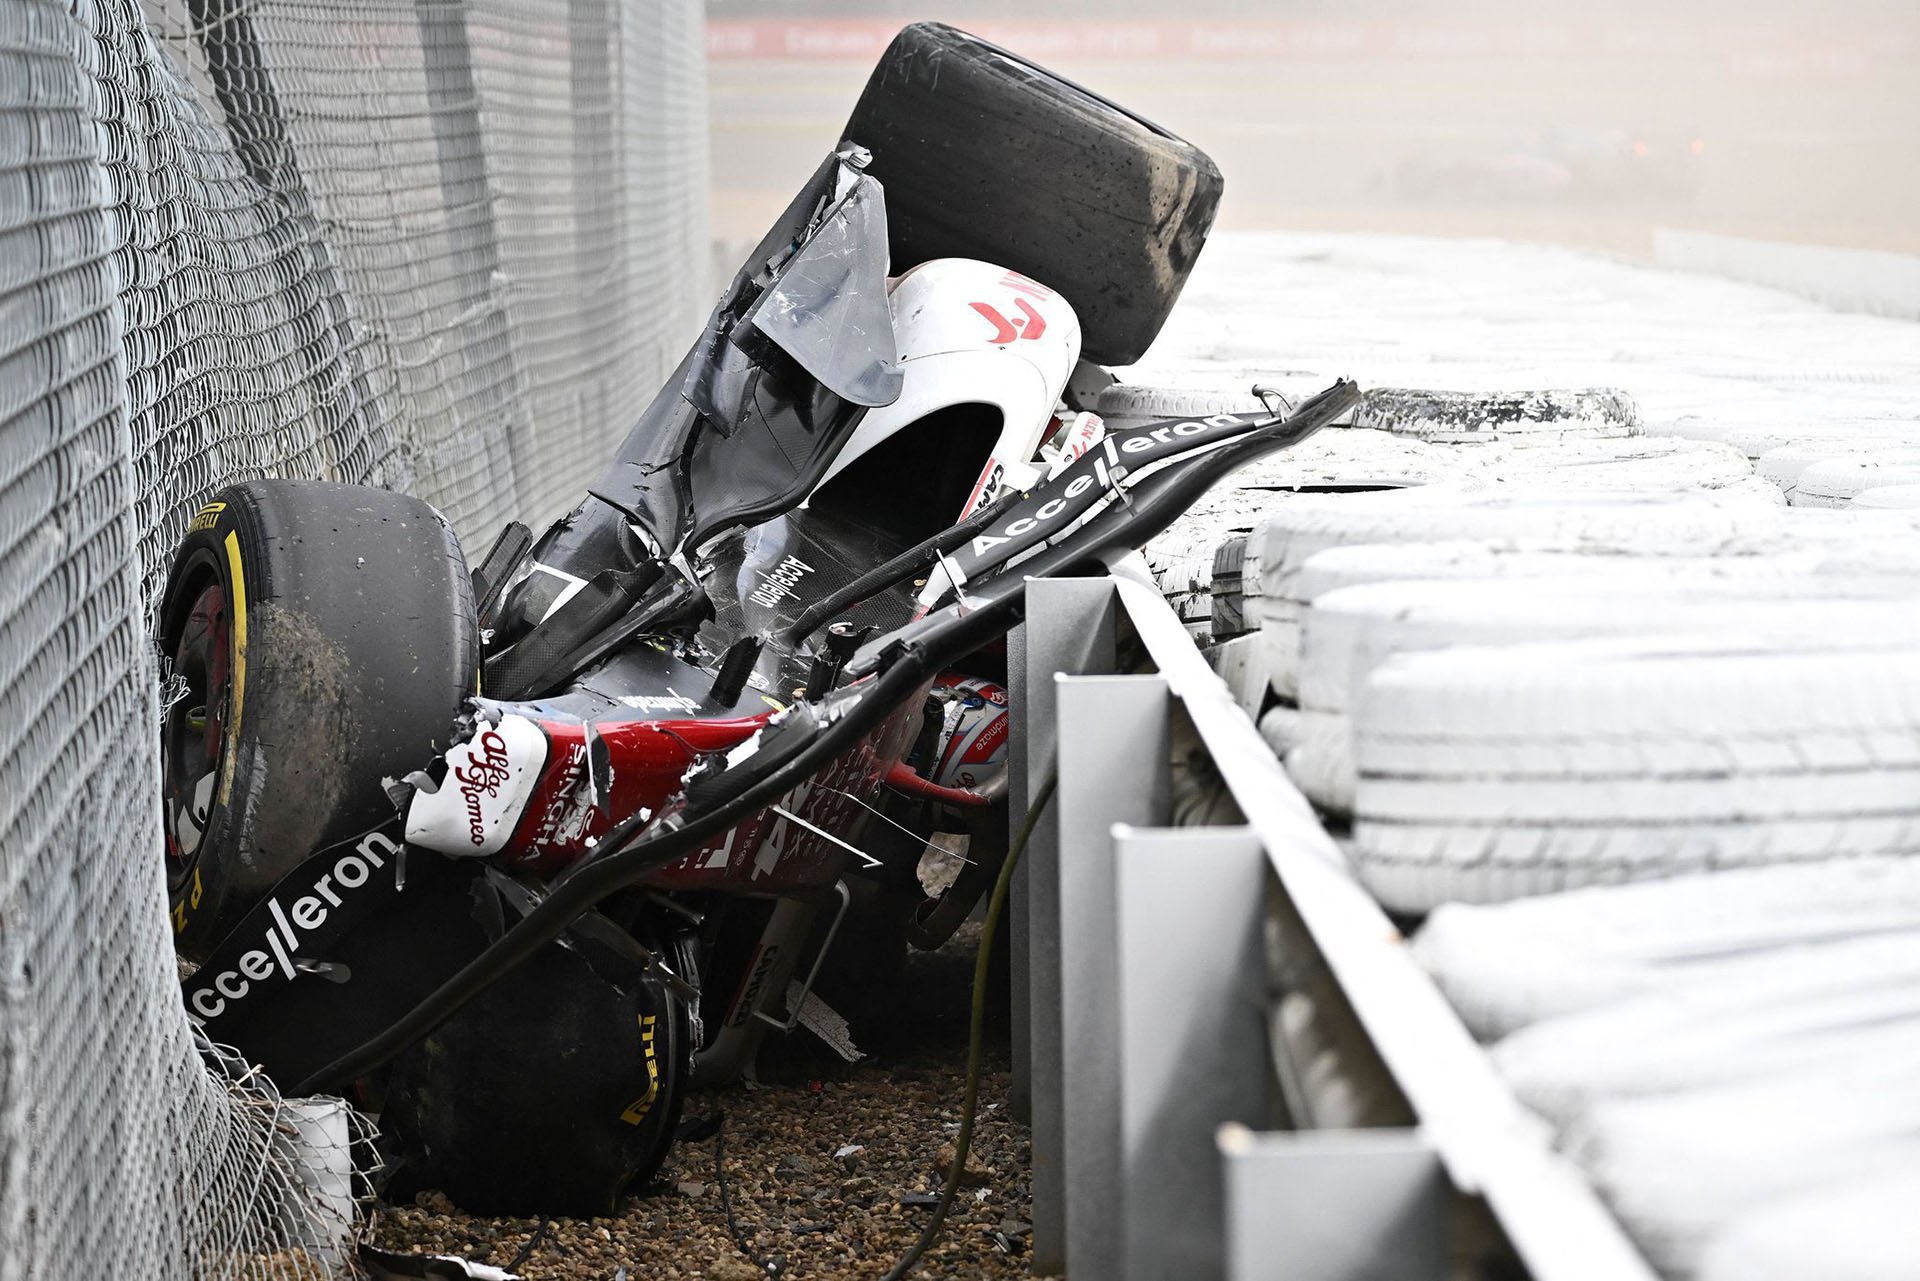 Zhou's car inverted against the guardrail, with its driver trapped and unable to get out under his own power